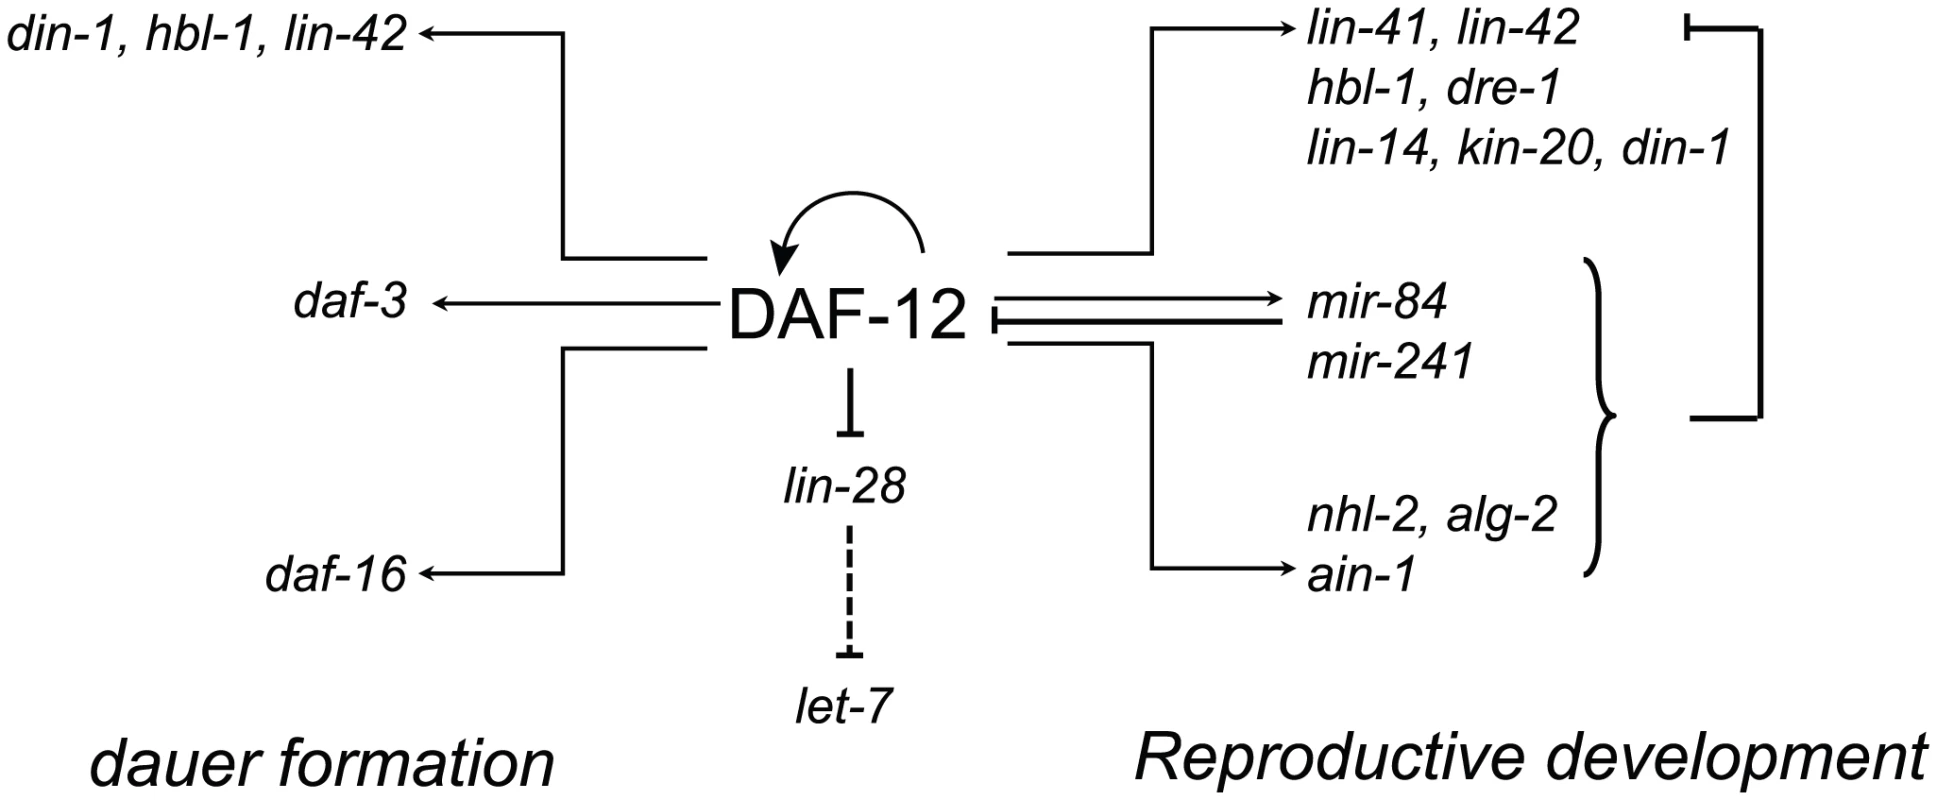 Multi-level control of genes involved in developmental decisions by DAF-12.